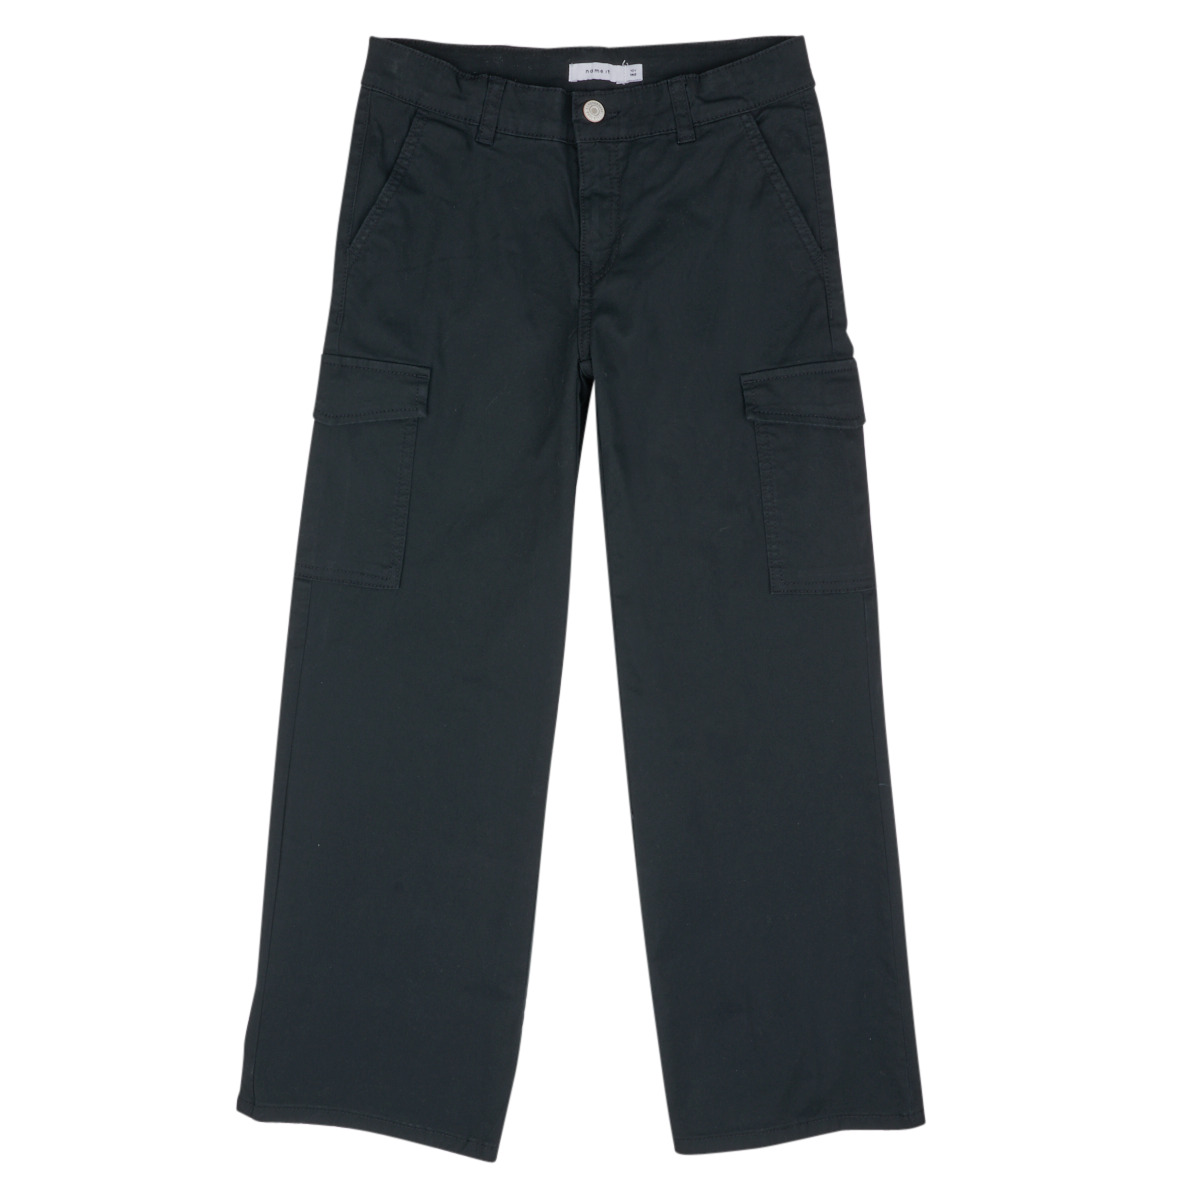 Free Child ! delivery NKFROSE it Clothing 8108-BA | Spartoo - NET Black WIDE Name - Cargo TWILL trousers CARGO